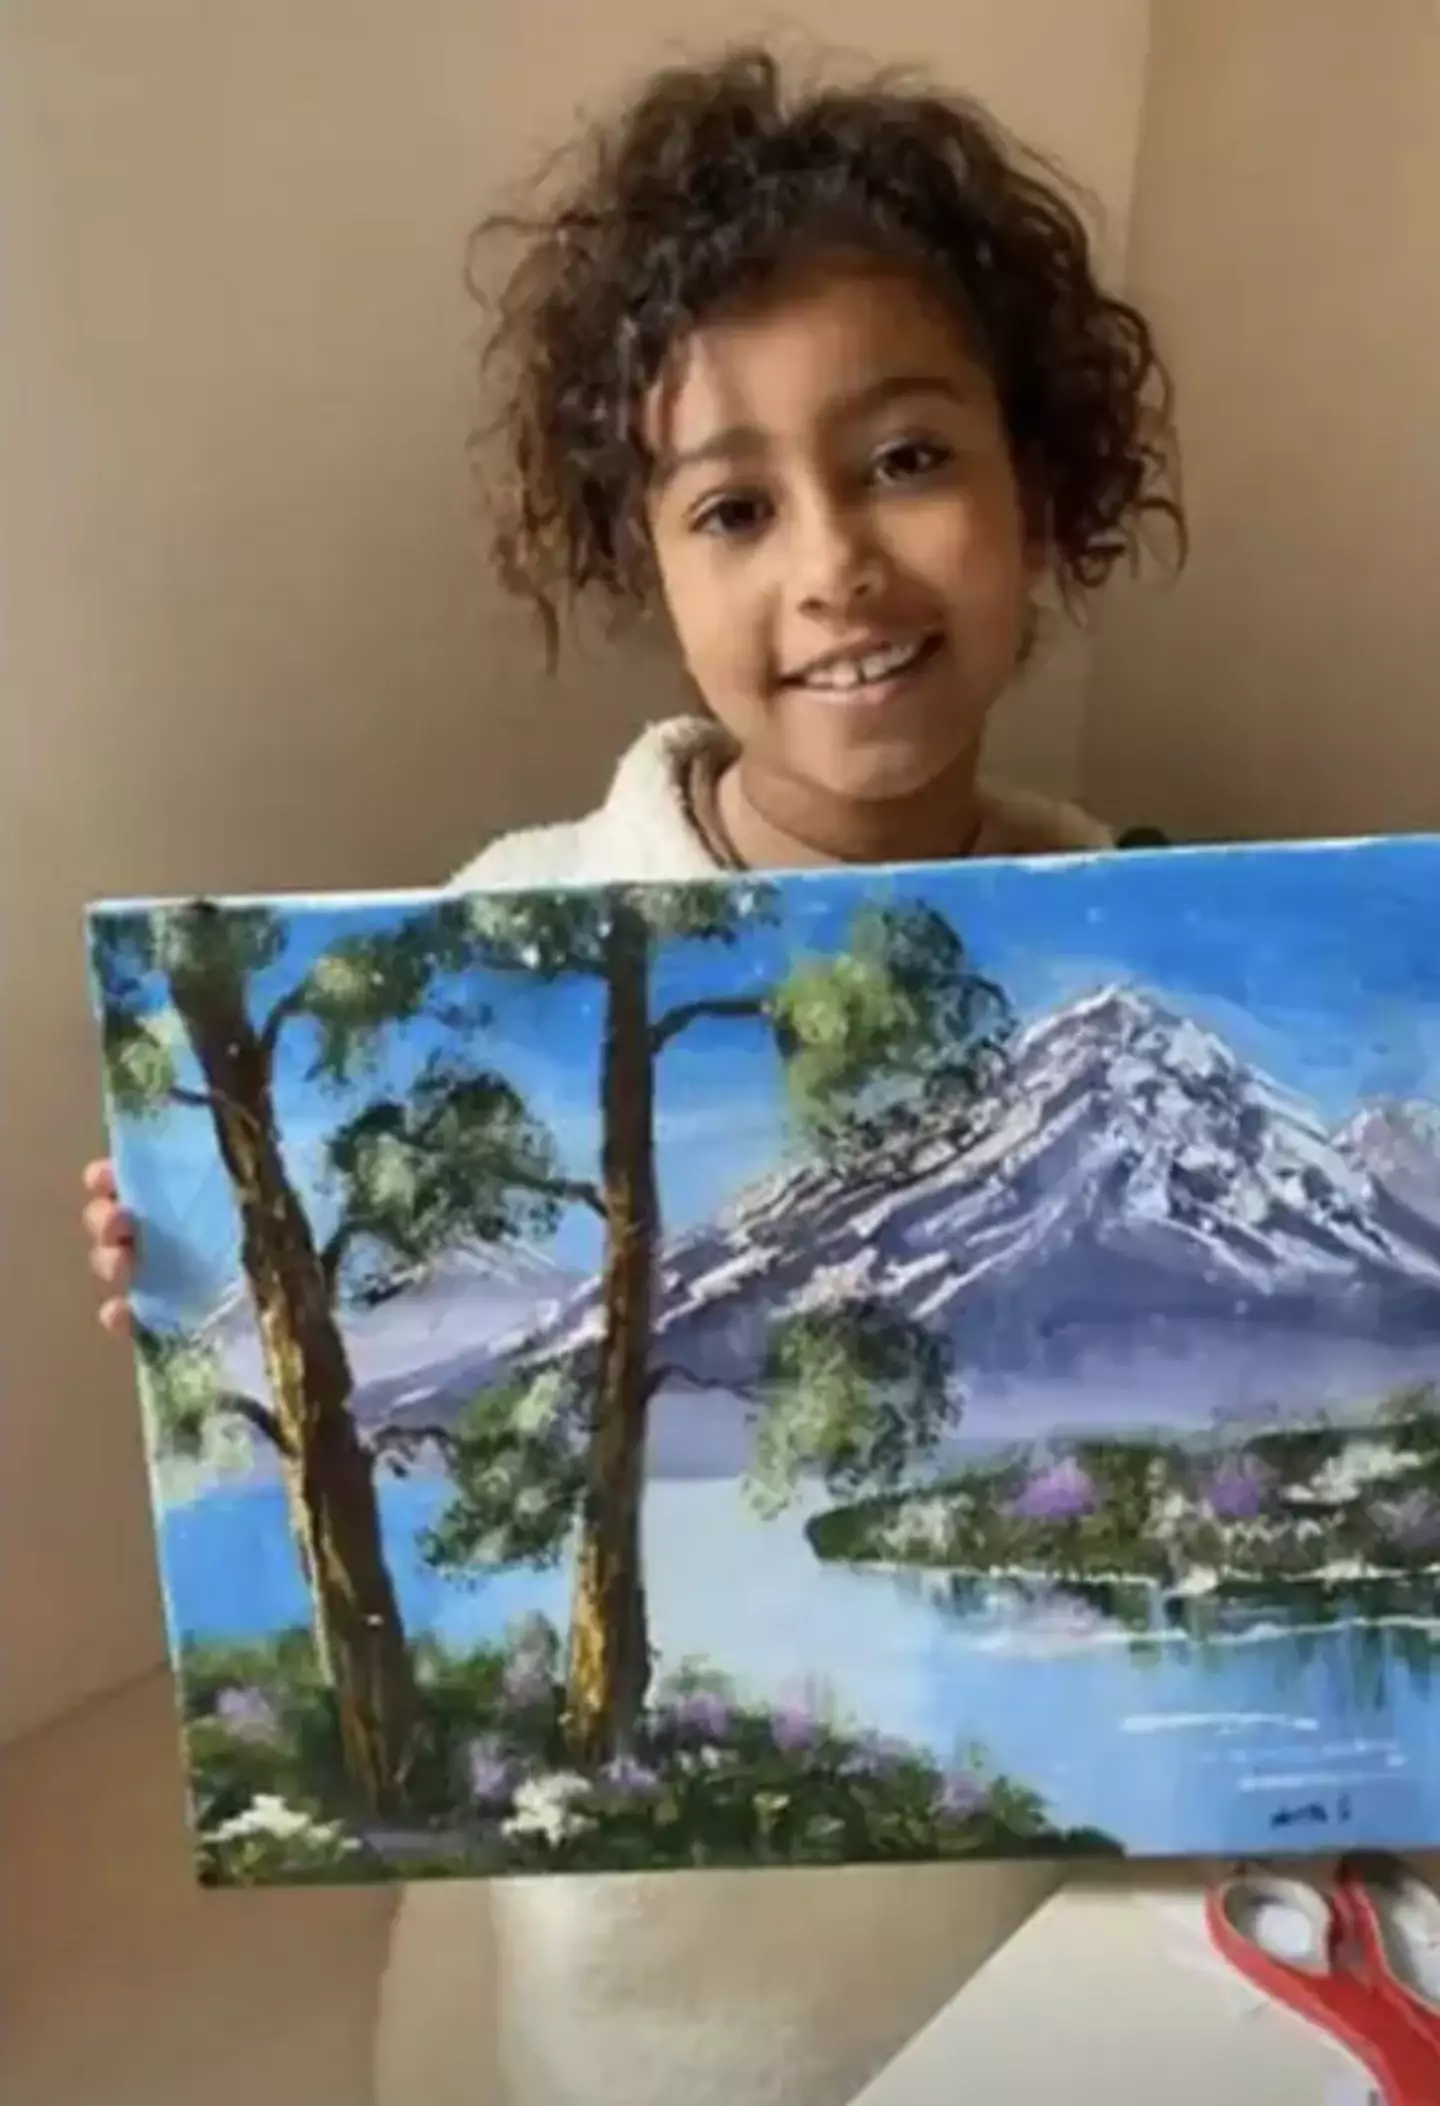 North has been attending an oil painting class.